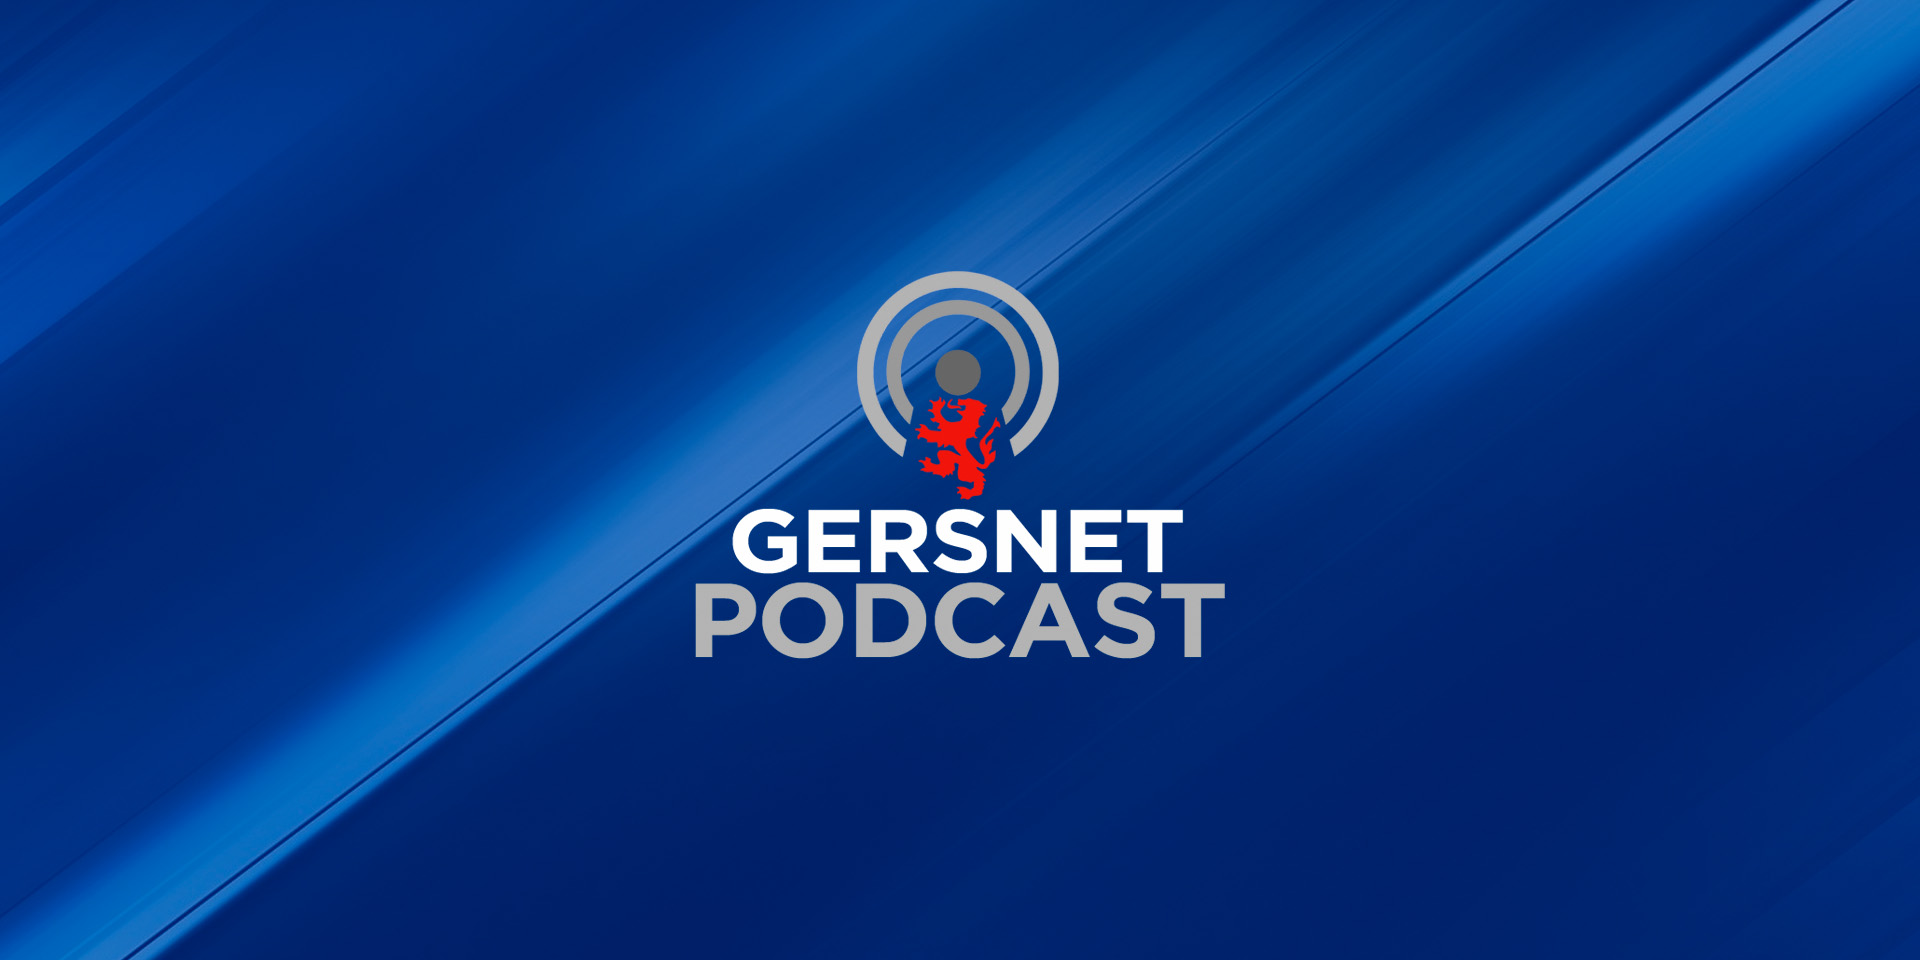 Gersnet Podcast 325 - Old Firm Preview